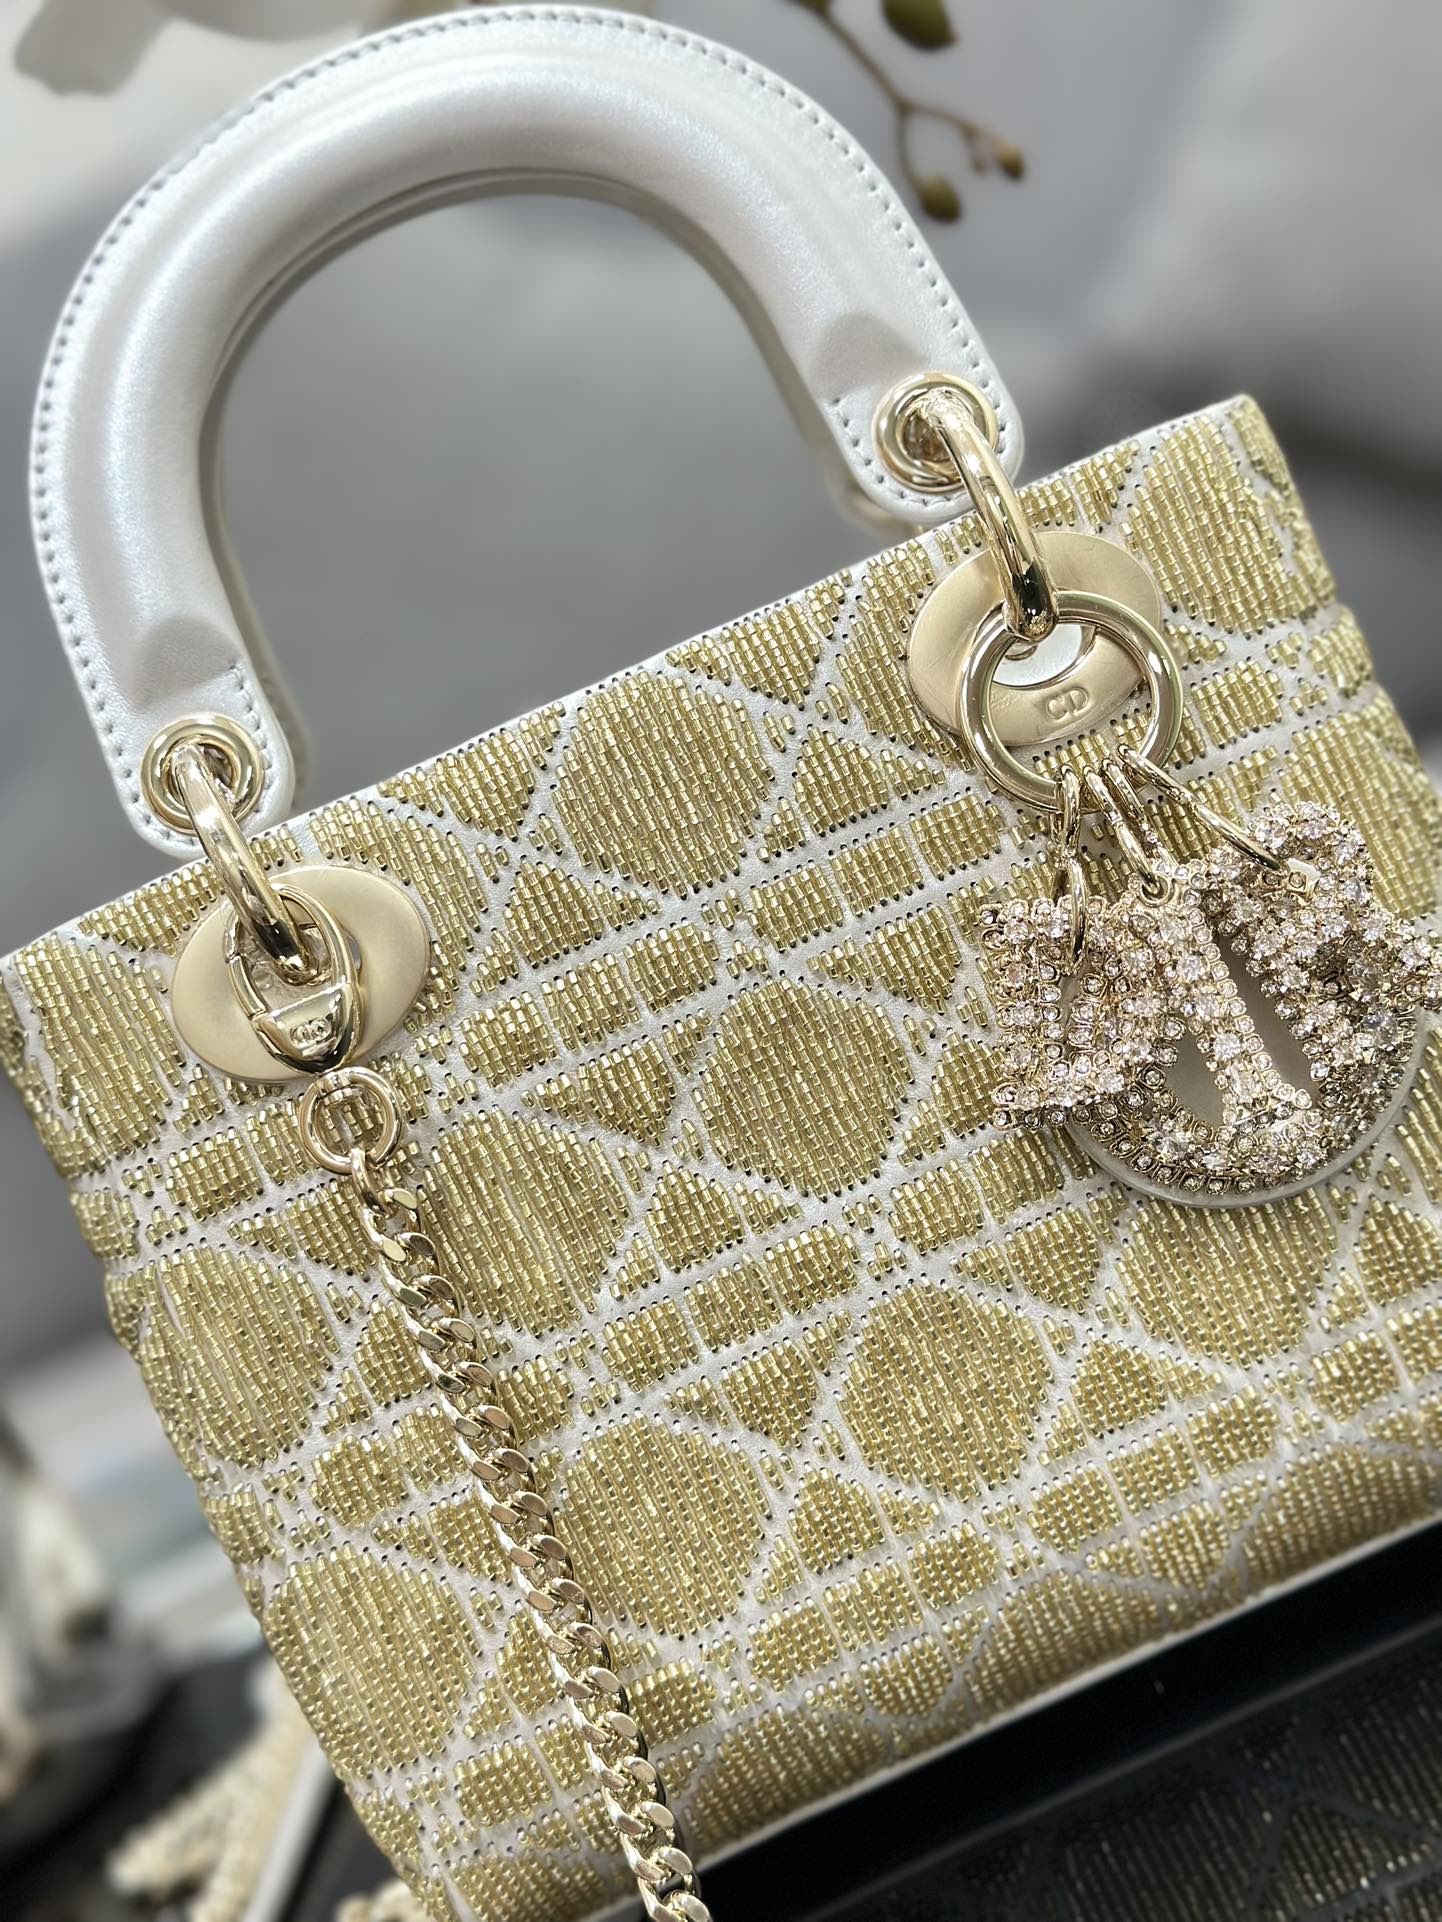 Replica Lady DIOR Bag with Three lattice embroidery limited edition bead tube gold